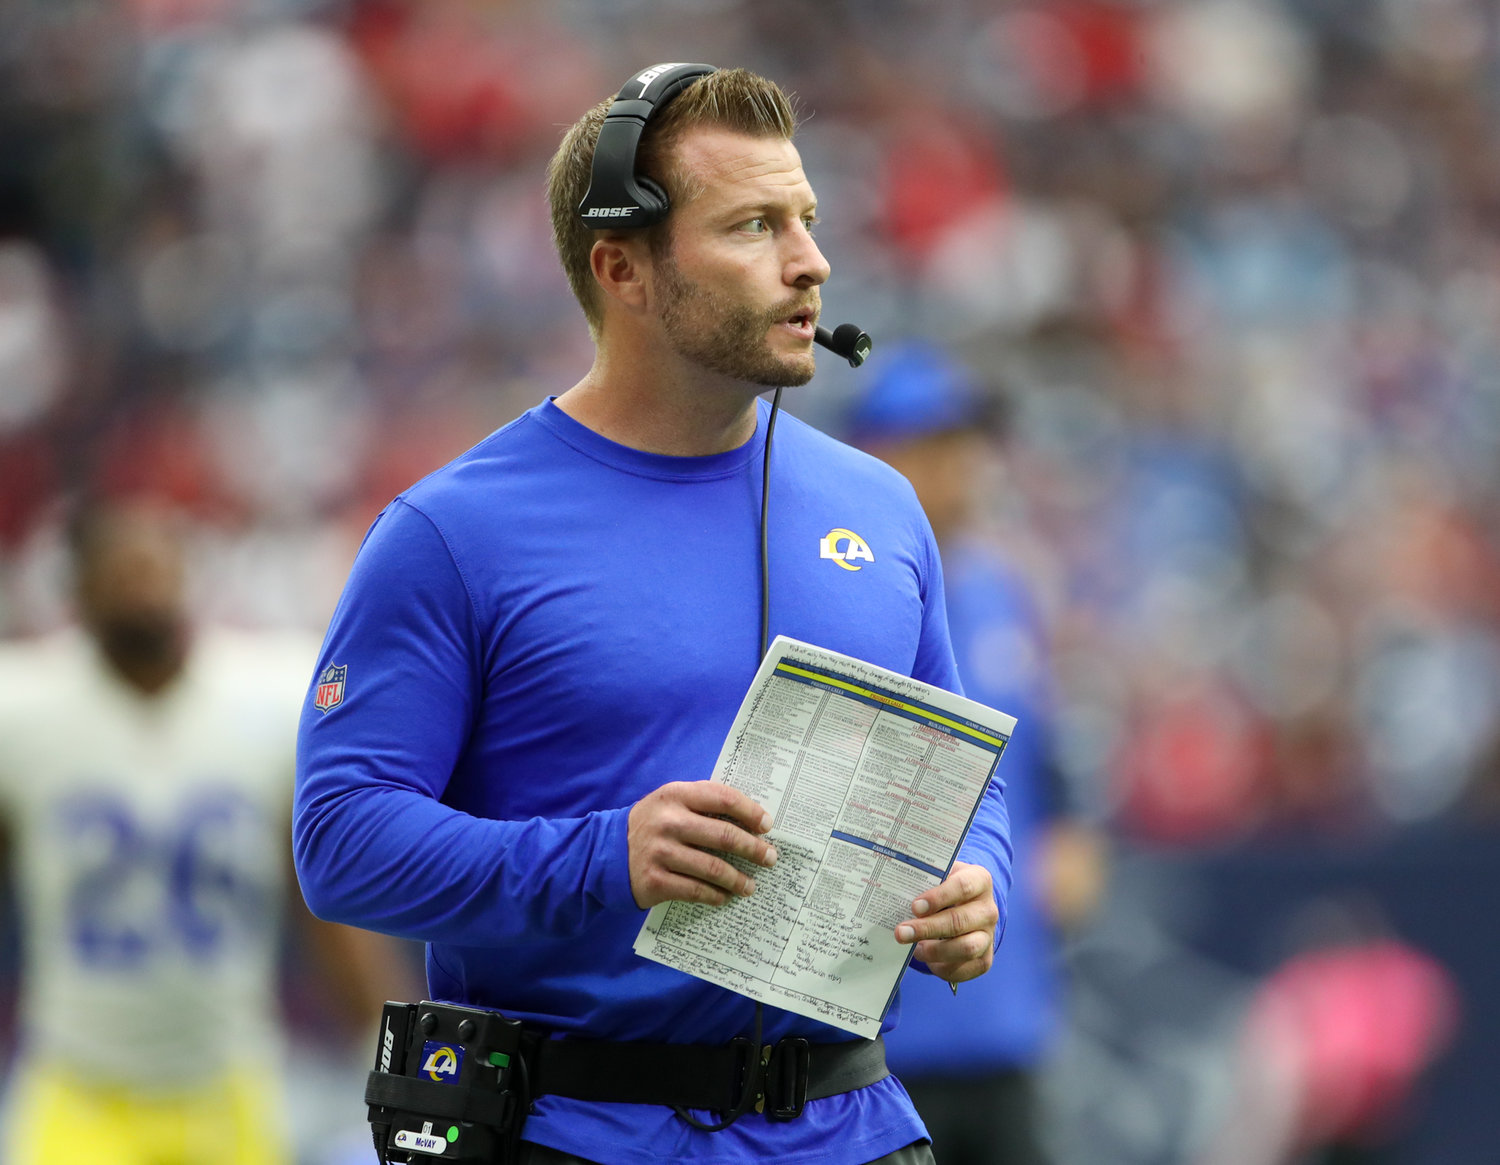 Los Angeles Rams head coach Sean McVay during an NFL game between Houston and the Los Angeles Rams on October 31, 2021 in Houston, Texas.